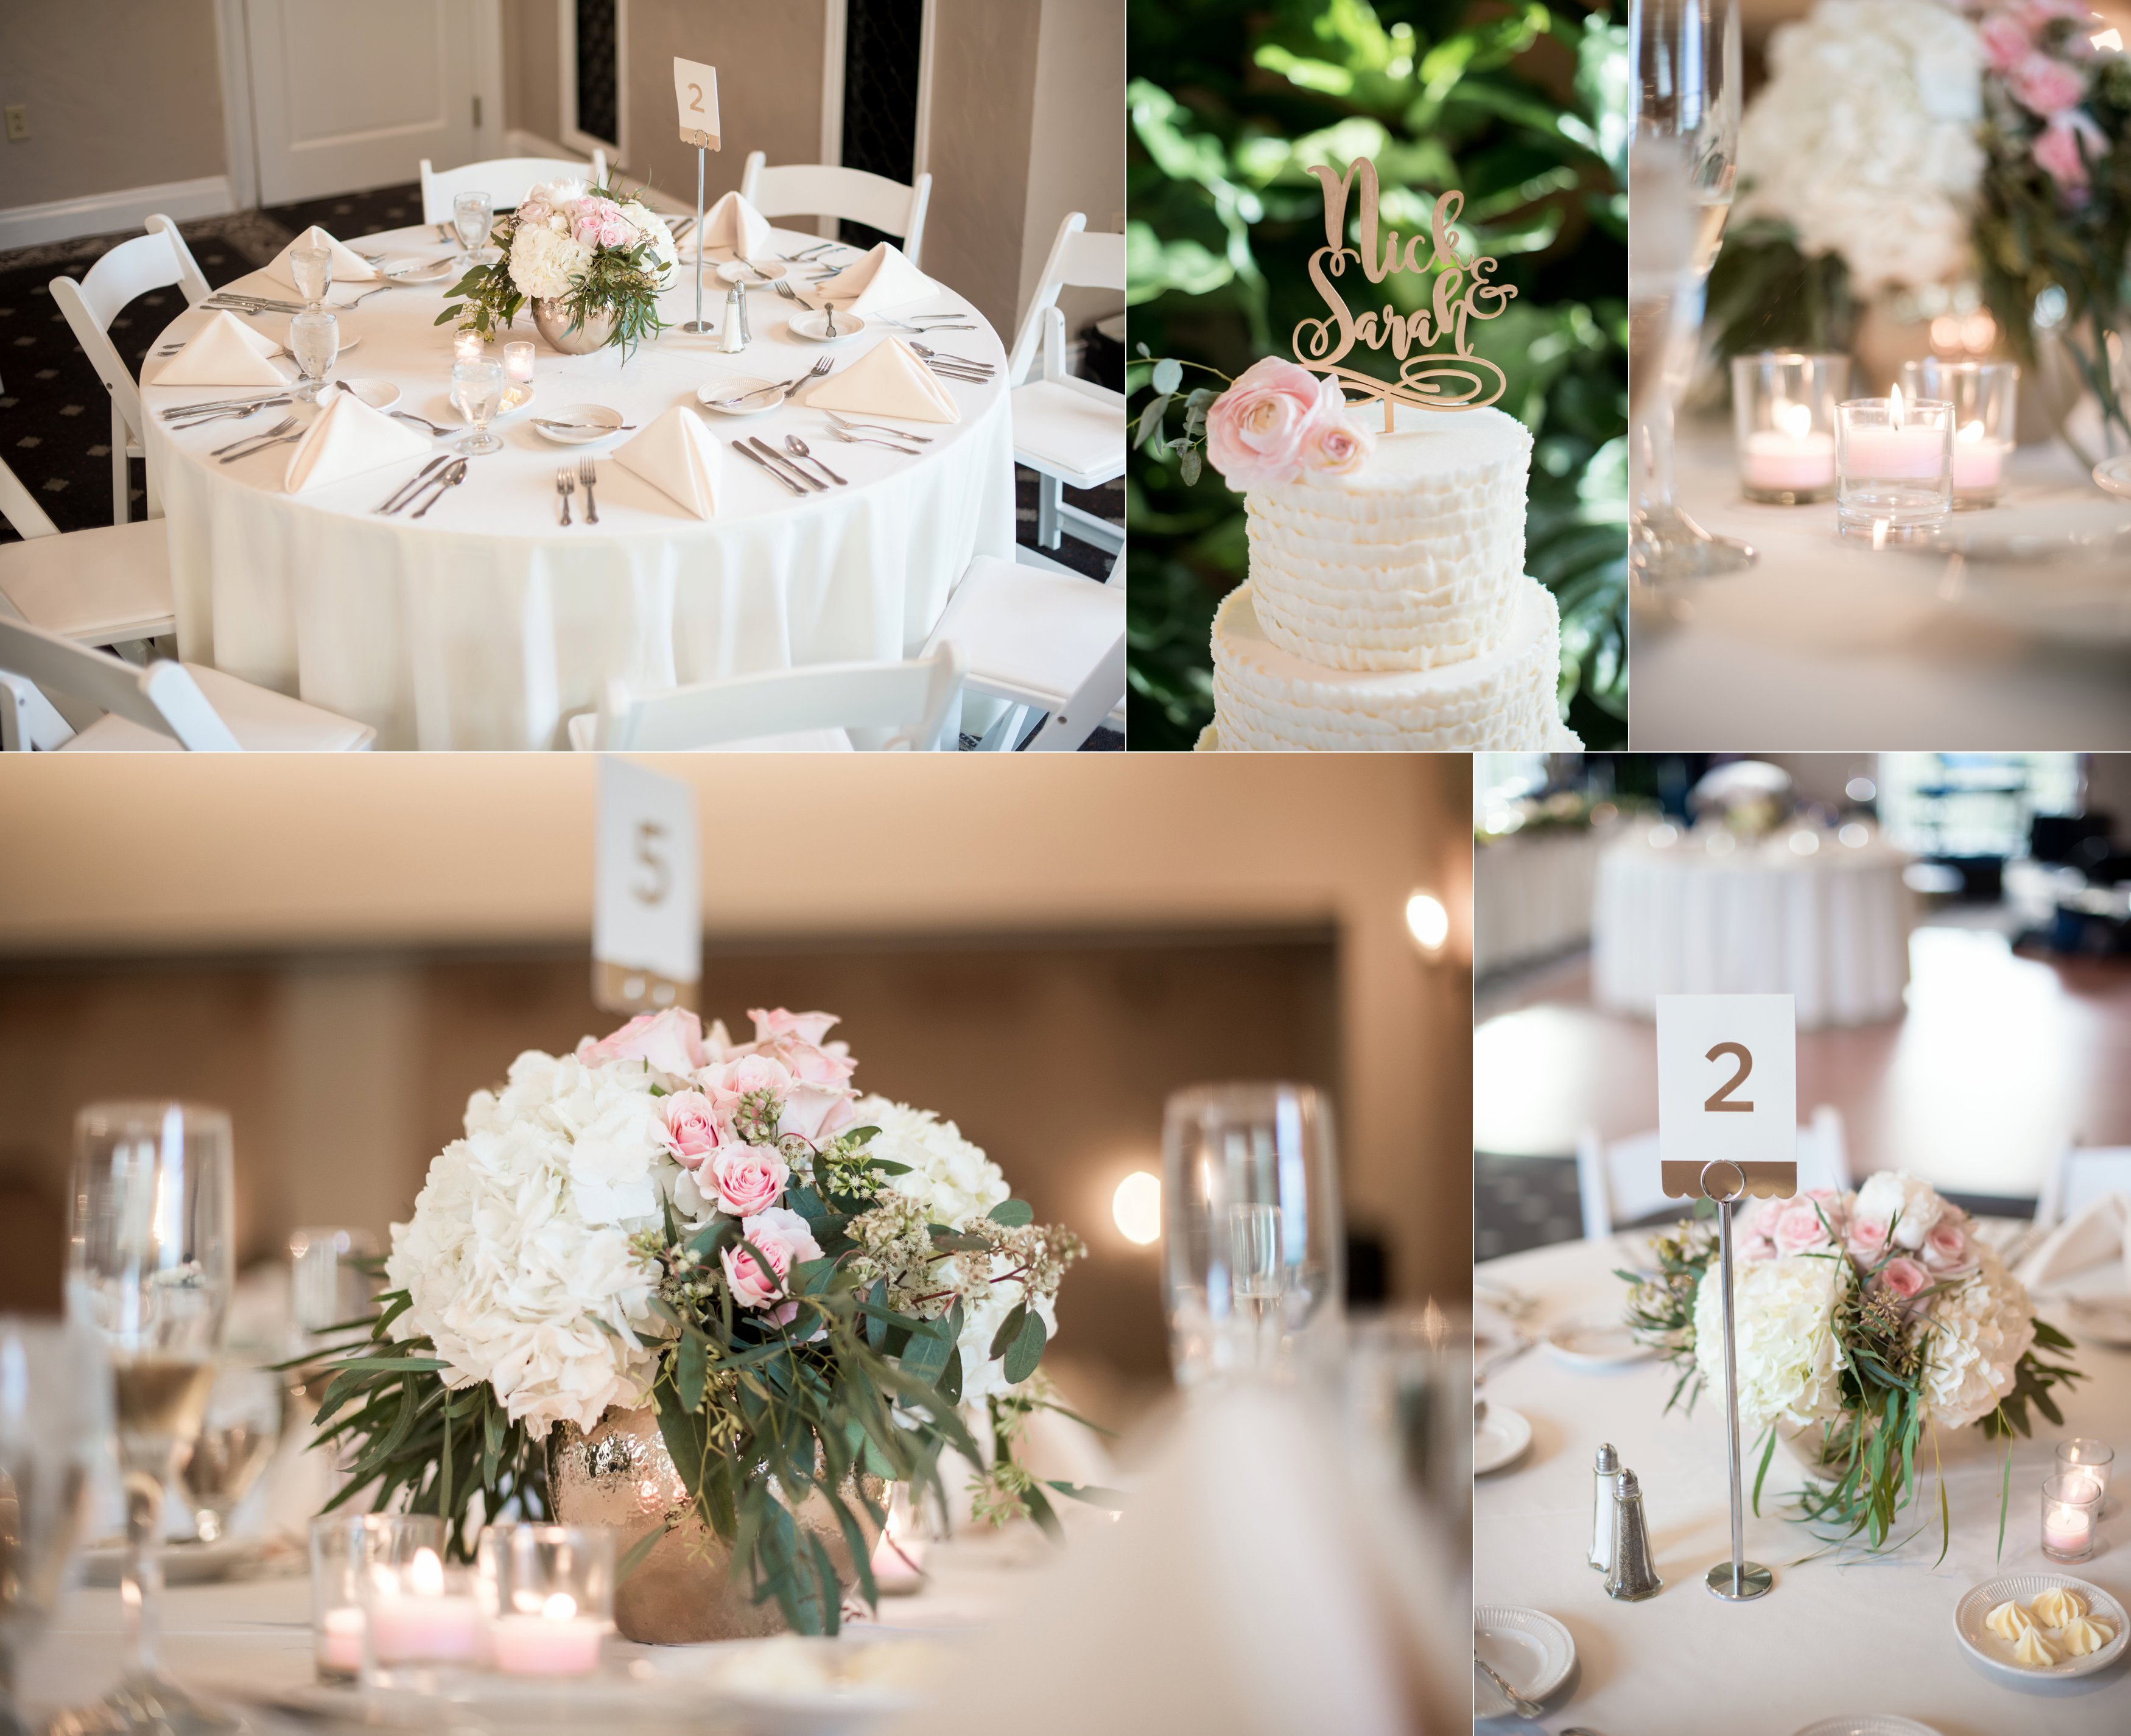 Sarah & Rachel | Wedding Photographers, Pale blue, blush, and white wedding | Hillcrest country club | Indianapolis, Indiana | simply perfection wedding cake